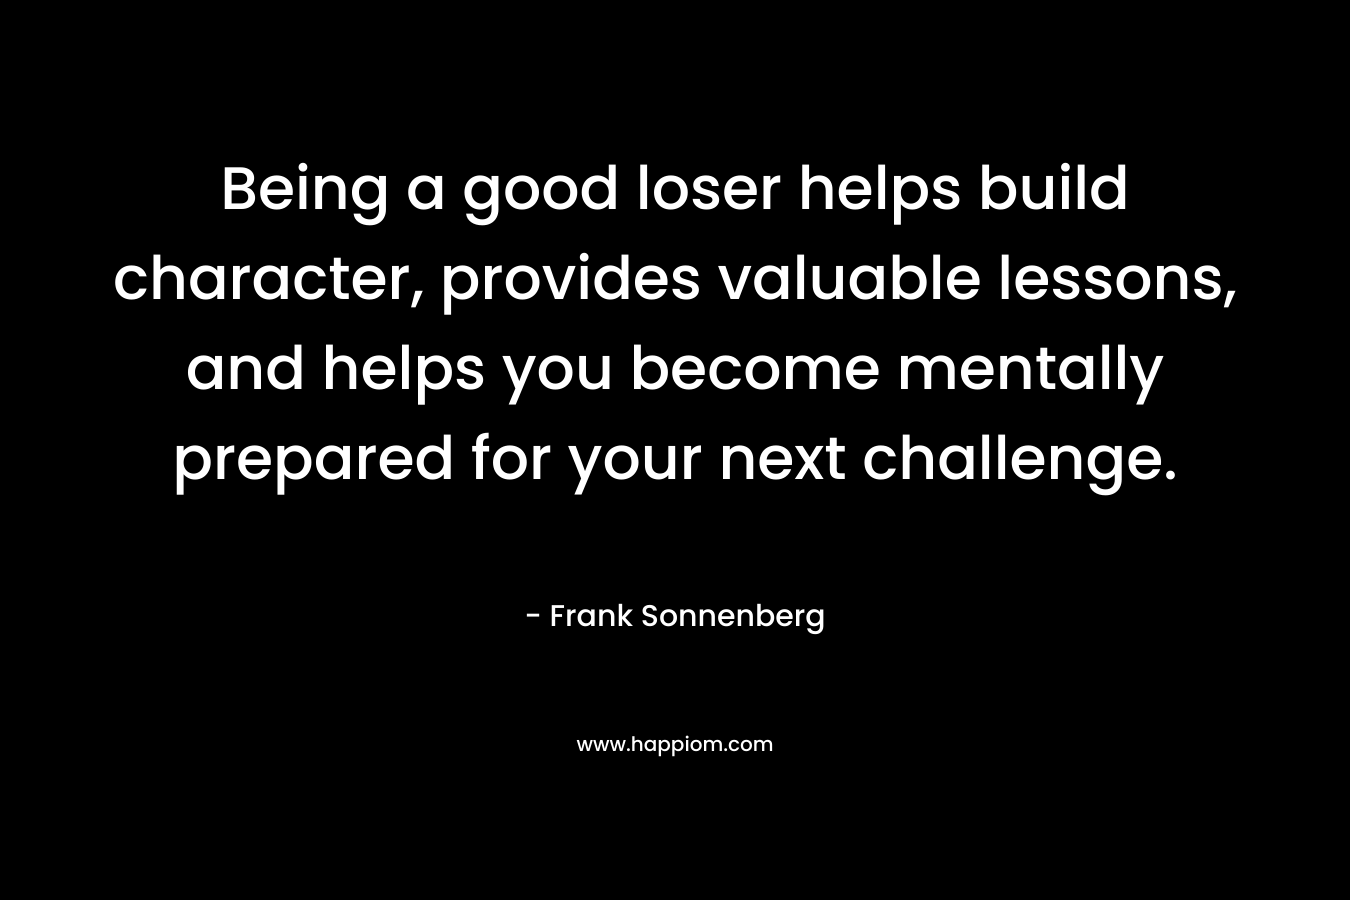 Being a good loser helps build character, provides valuable lessons, and helps you become mentally prepared for your next challenge. – Frank Sonnenberg